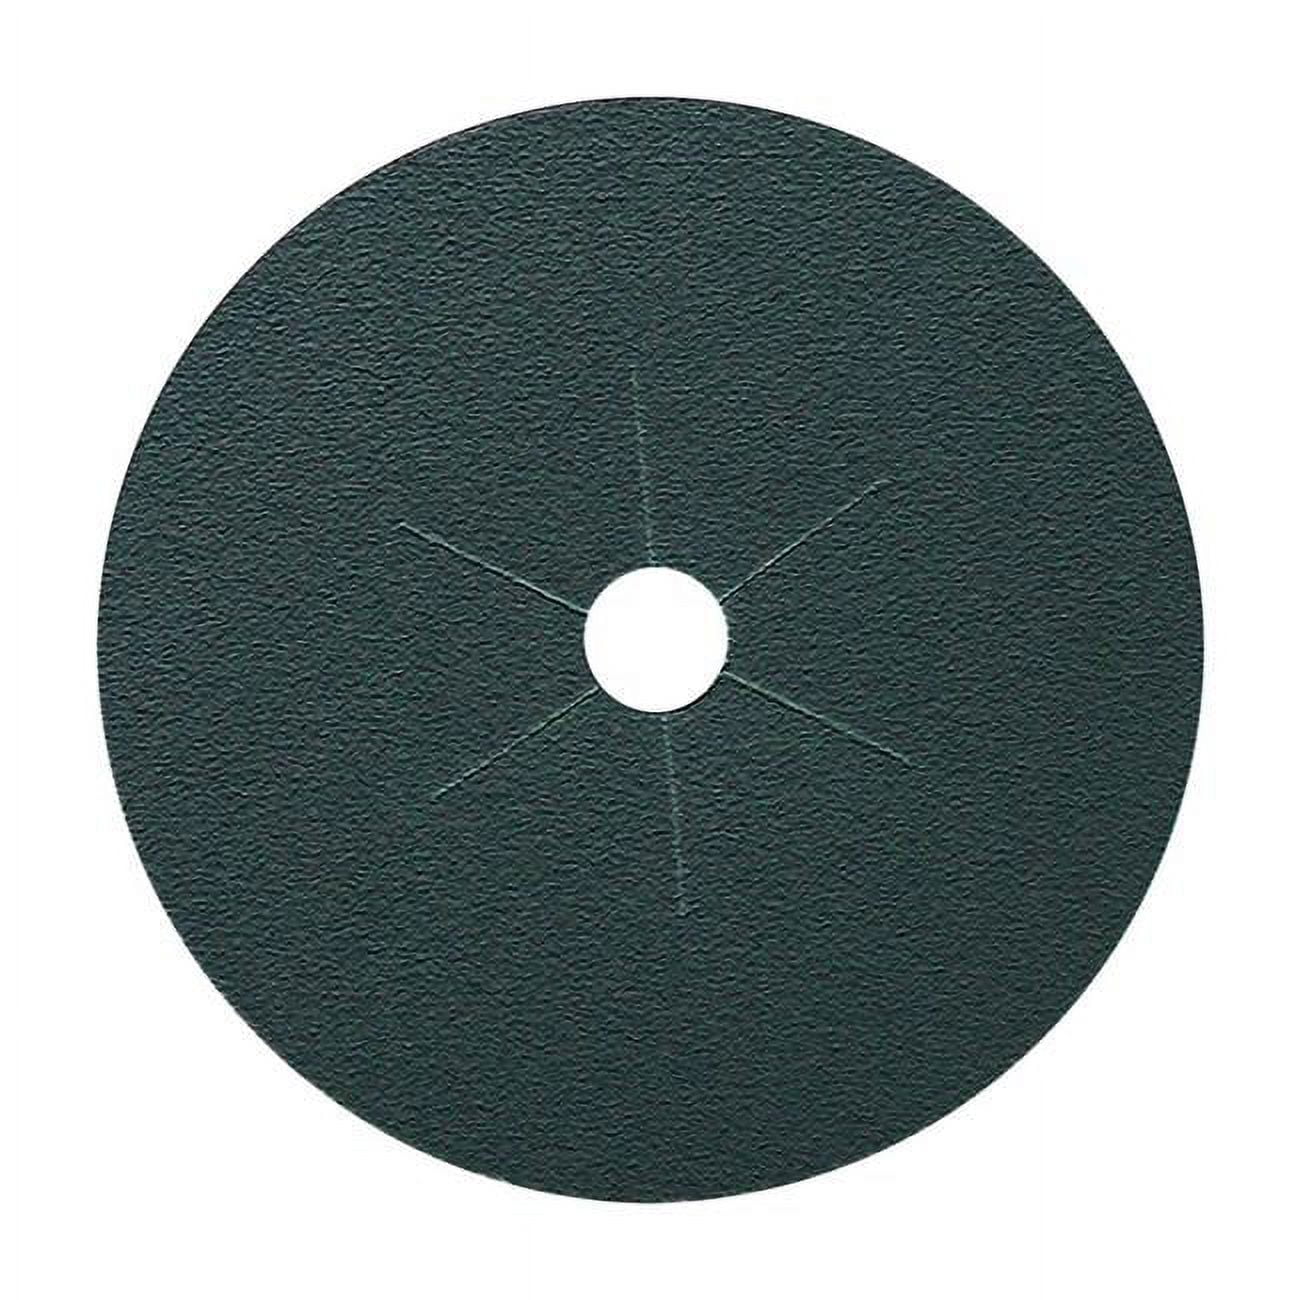 1861863 7 In. Silicon Carbide Center Mount Floor Sanding Disc 24 Grit Extra Coarse - 25 Per Pack